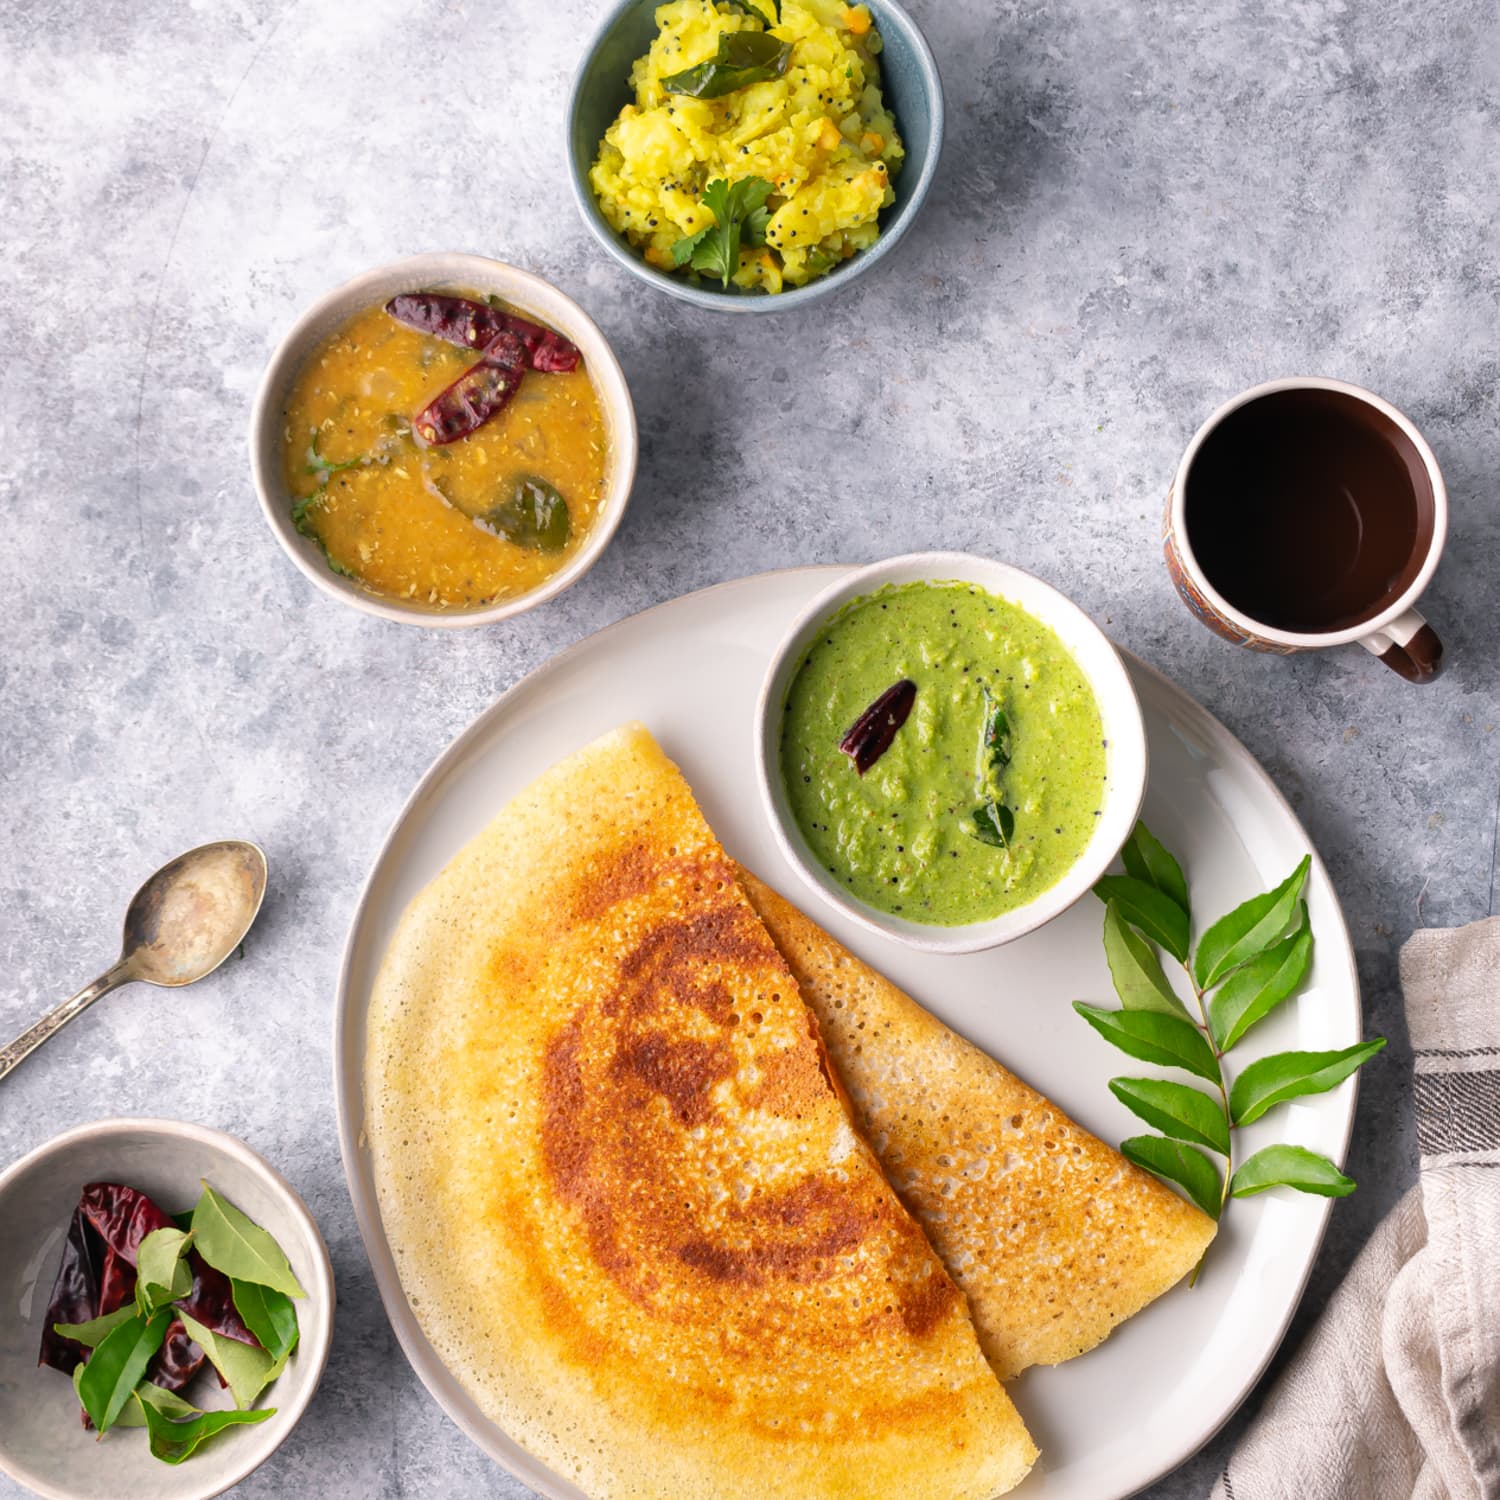 A Step-by-Step Guide to Making the Very Best Dosa from Scratch